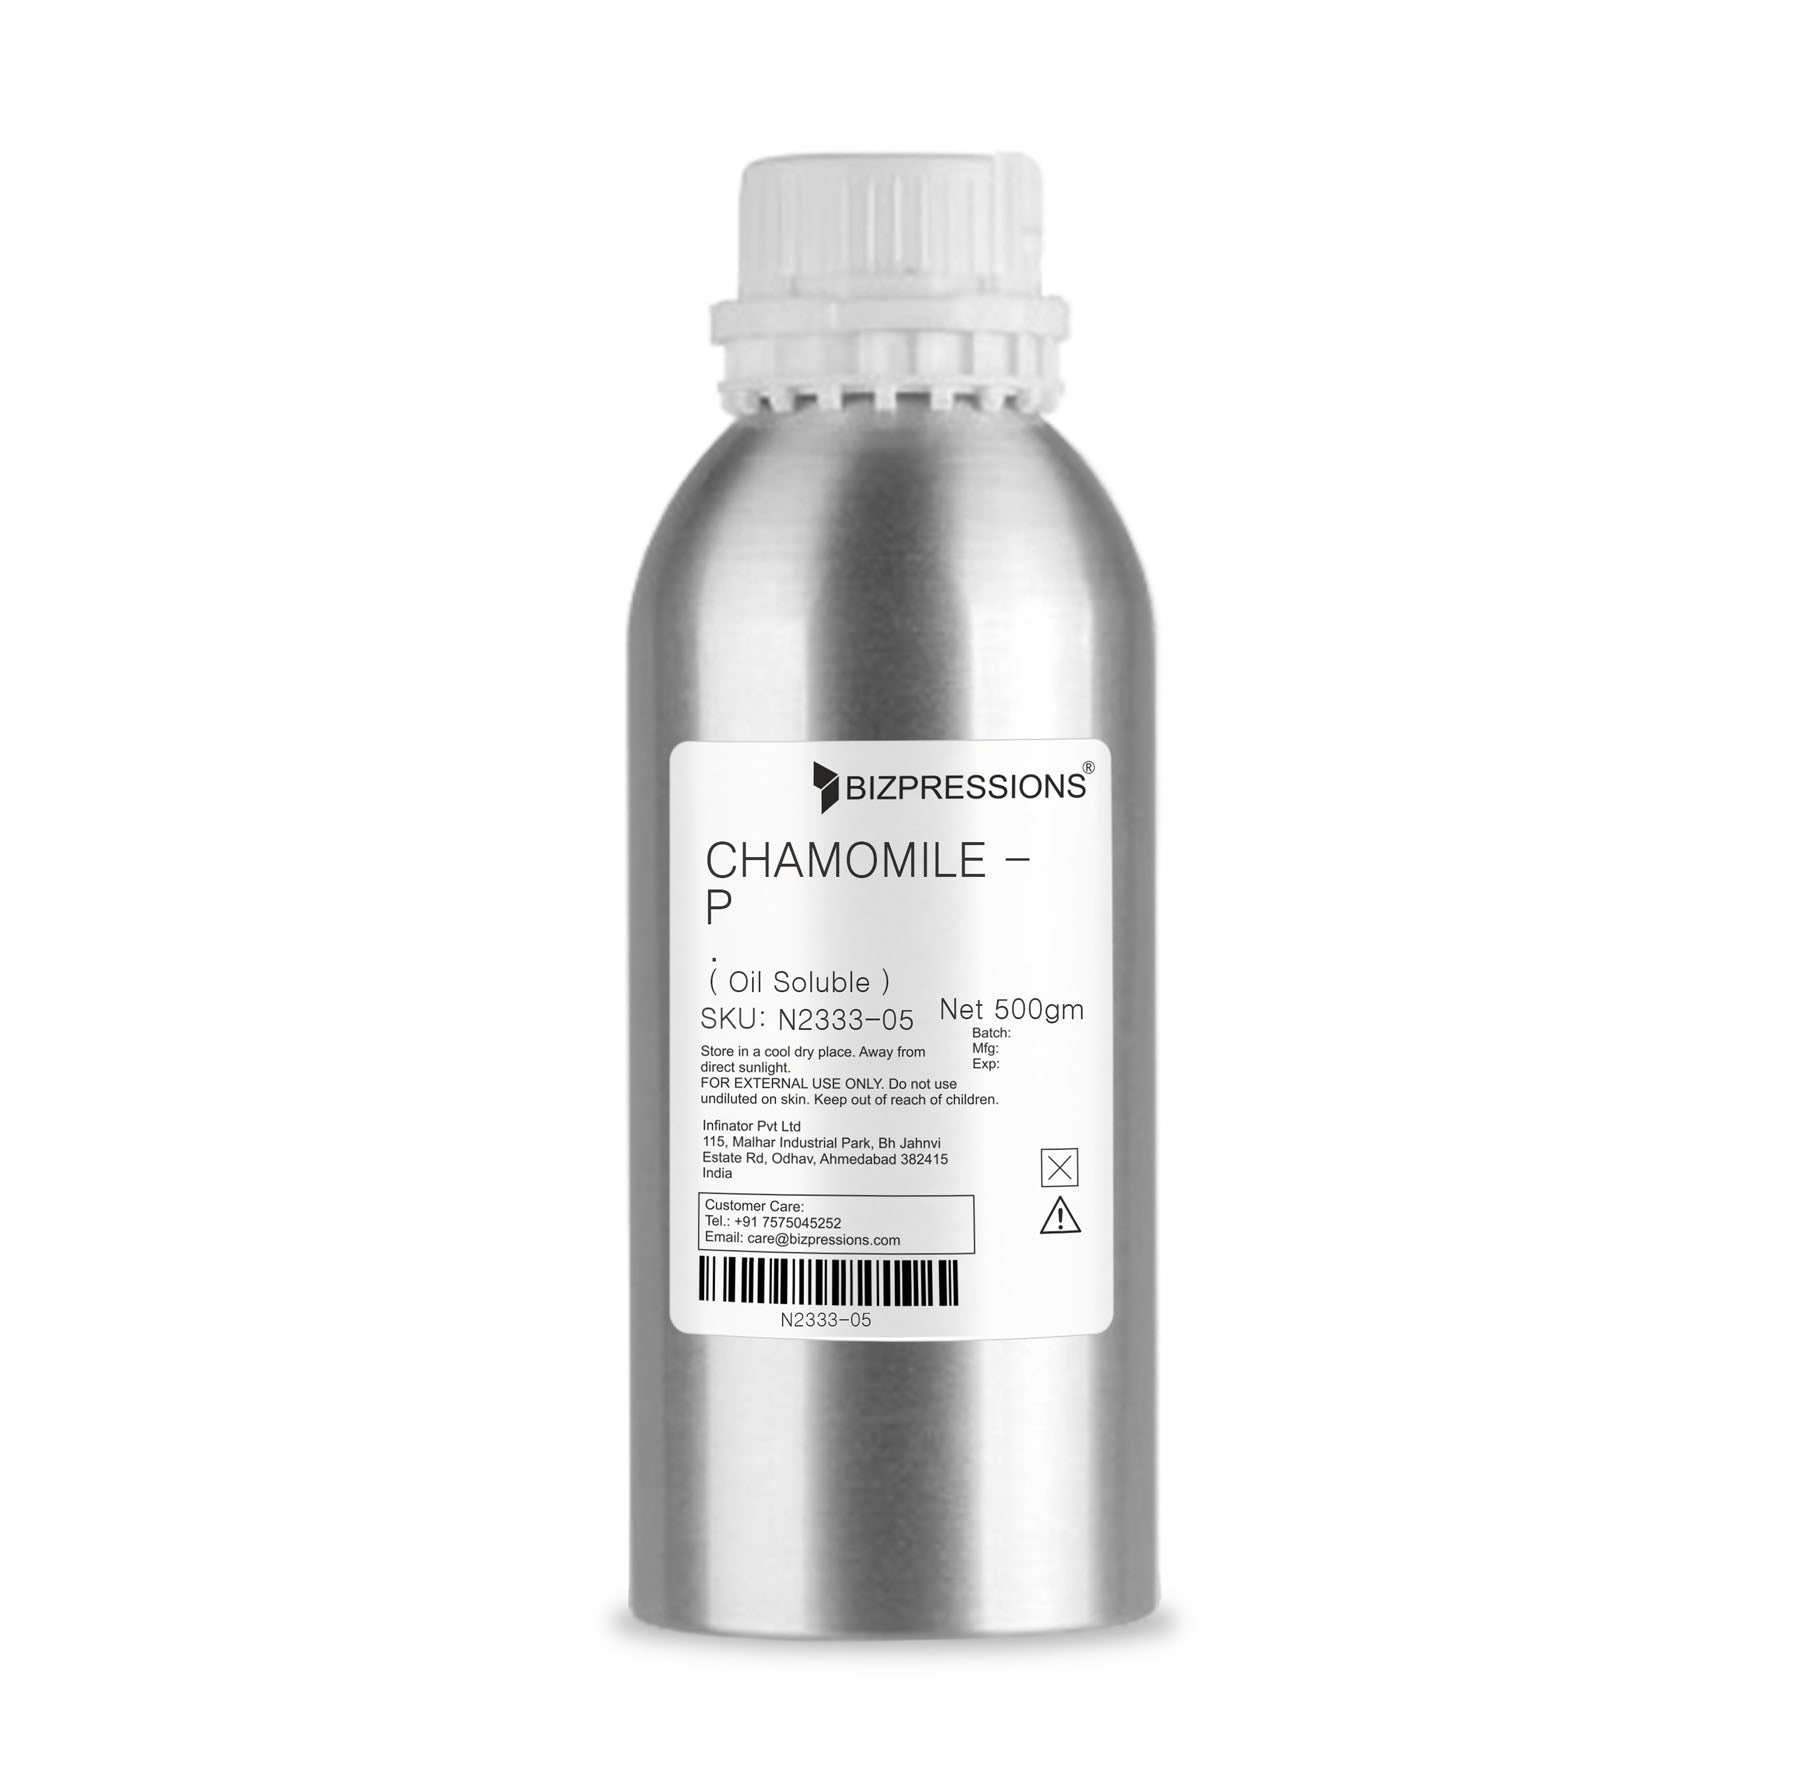 CHAMOMILE - P - Fragrance ( Oil Soluble ) - 500 gm